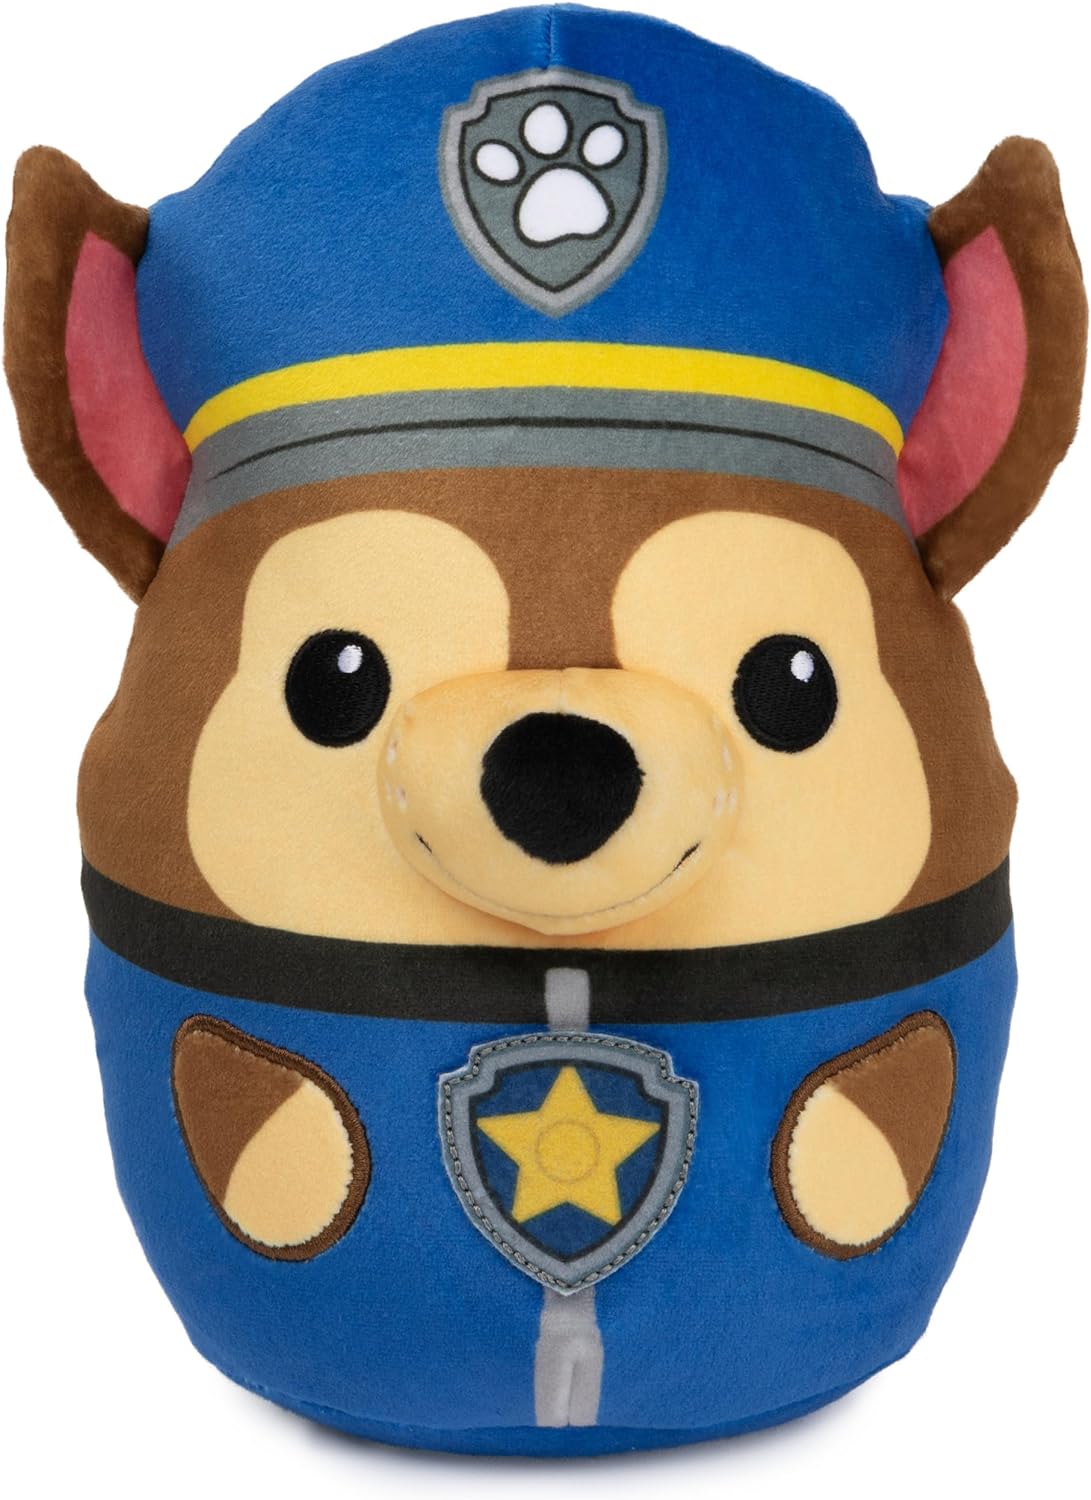 PAW Patrol 12" Chase Squish Pillow by Spinmaster #6068583